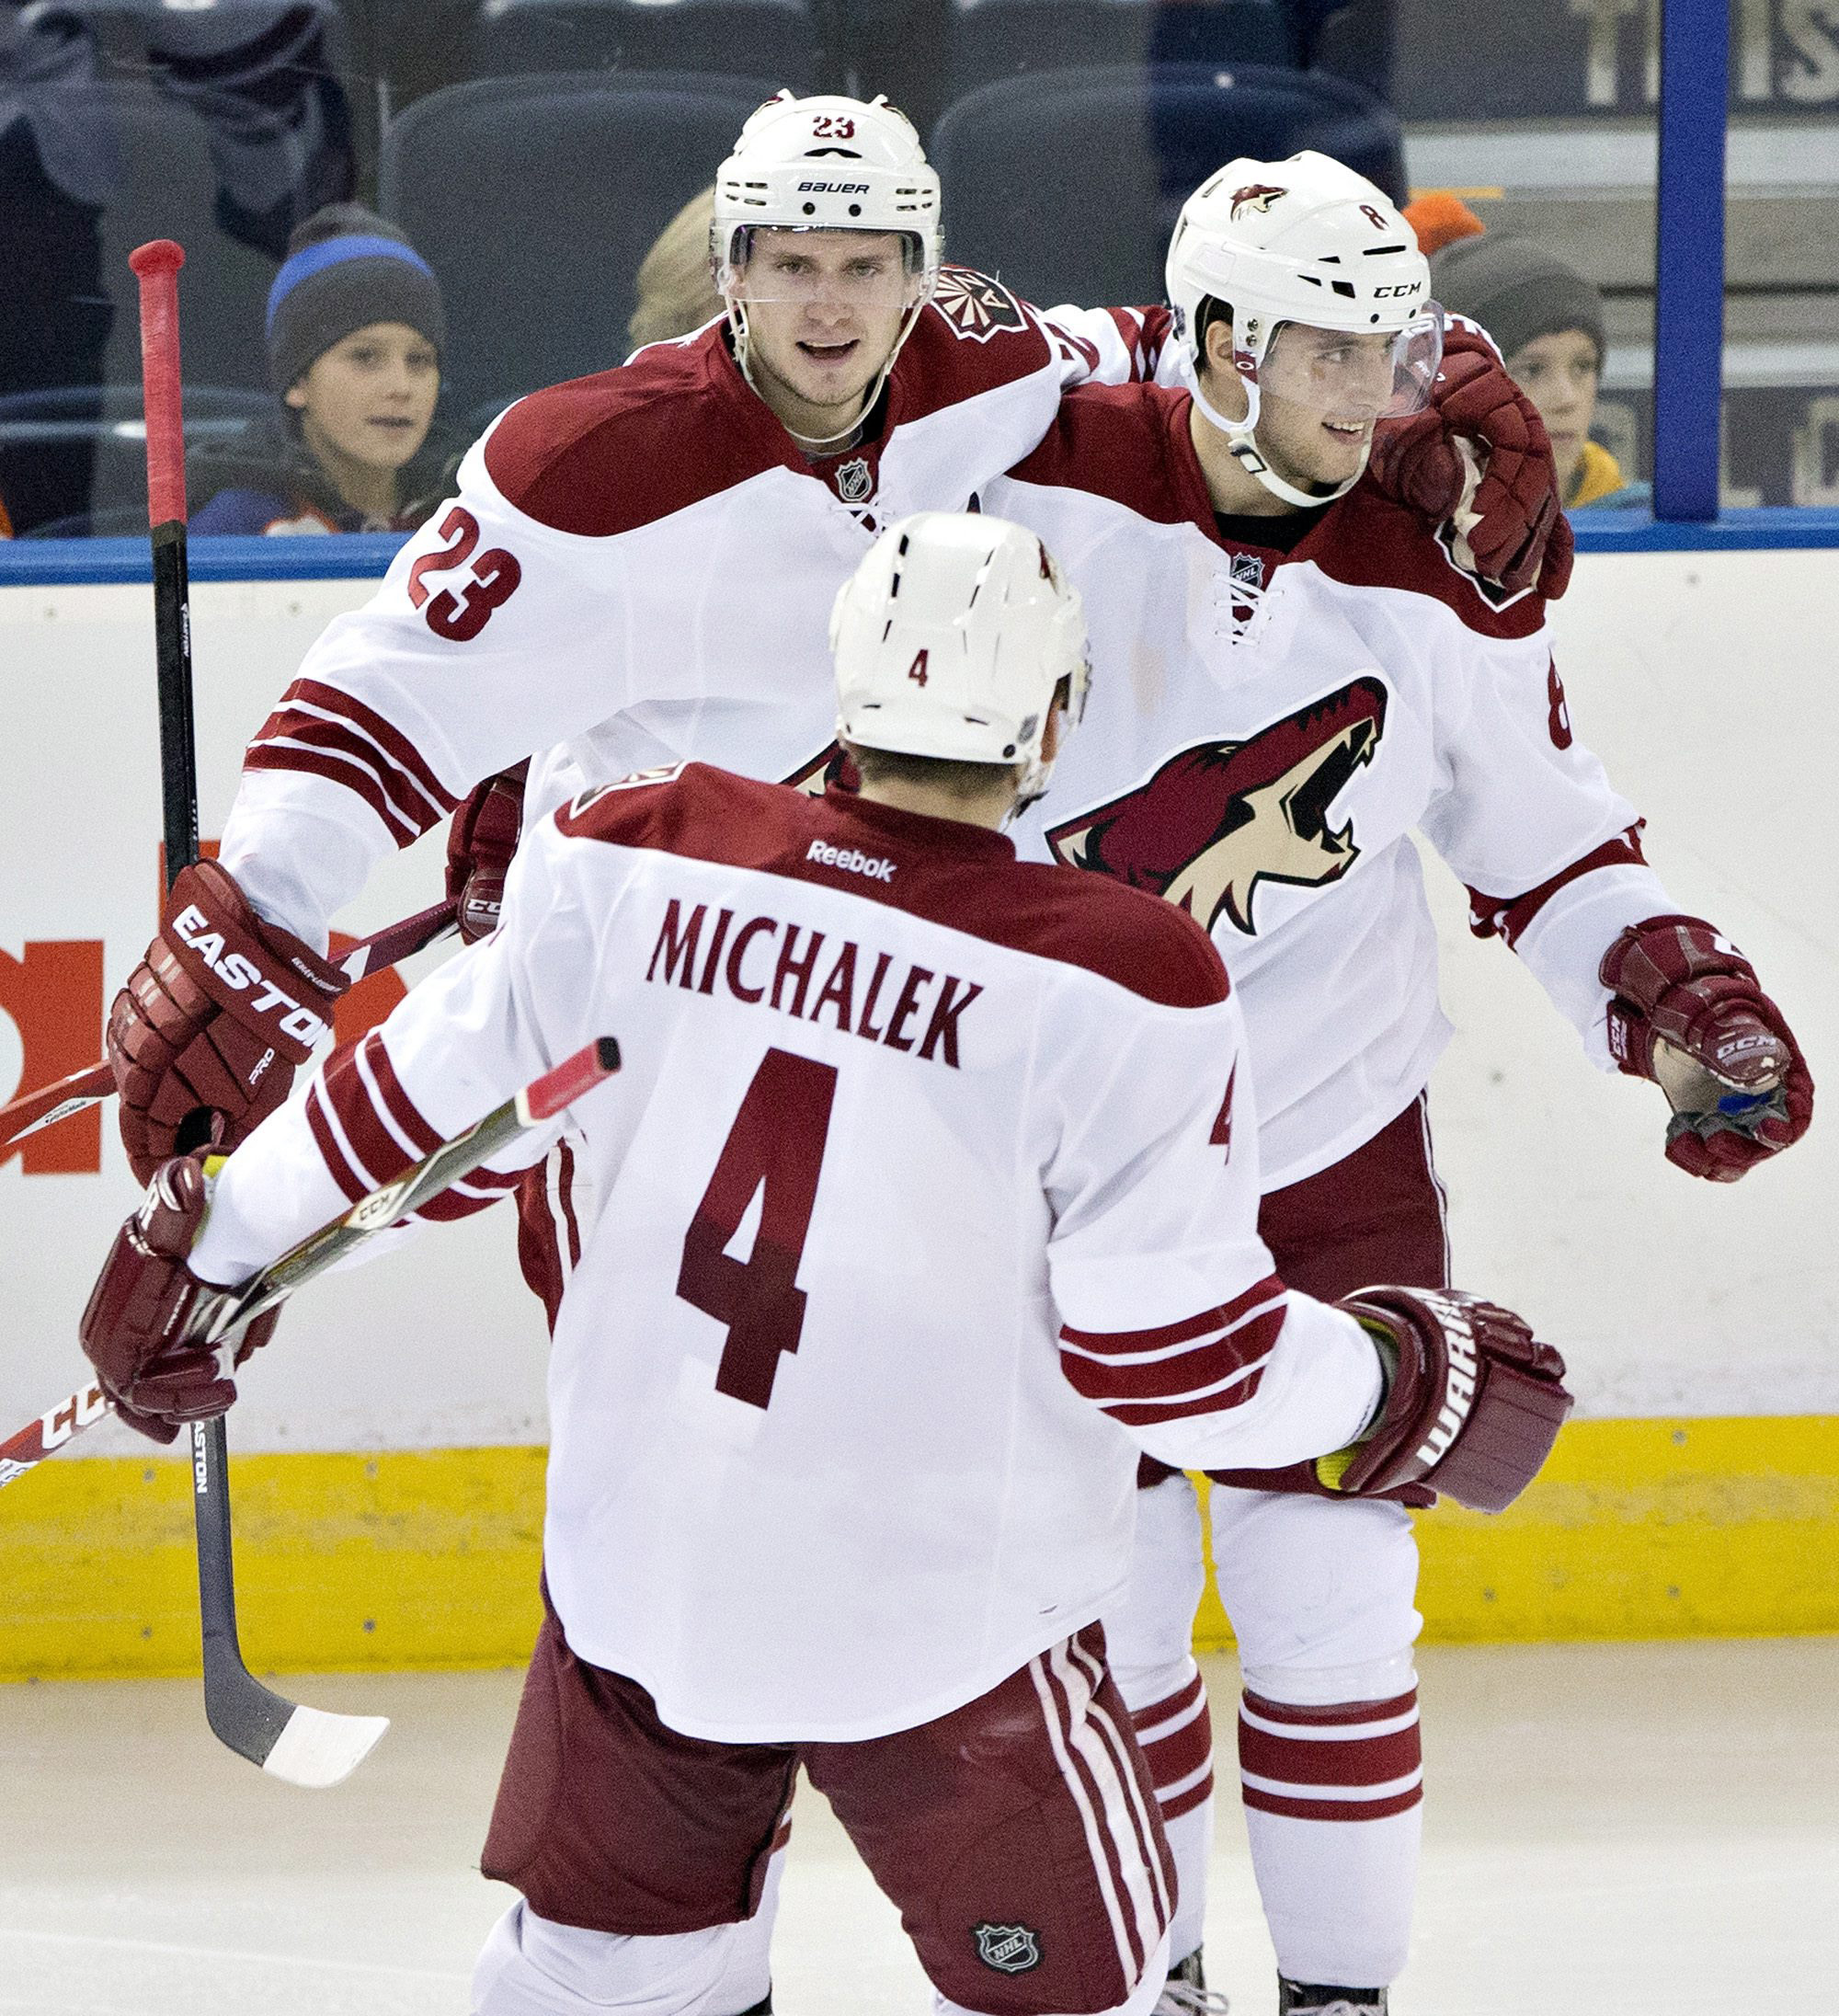 Arizona Coyotes' Oliver Ekman-Larsson (23), Tobias Rieder (8) and Zbynek Michalek (4) celebrate a goal against the Edmonton Oilers during the second period of an NHL hockey game in Edmonton, Alberta., on Monday, Dec. 1, 2014. (AP Photo/The Canadian Press, Jason Franson)